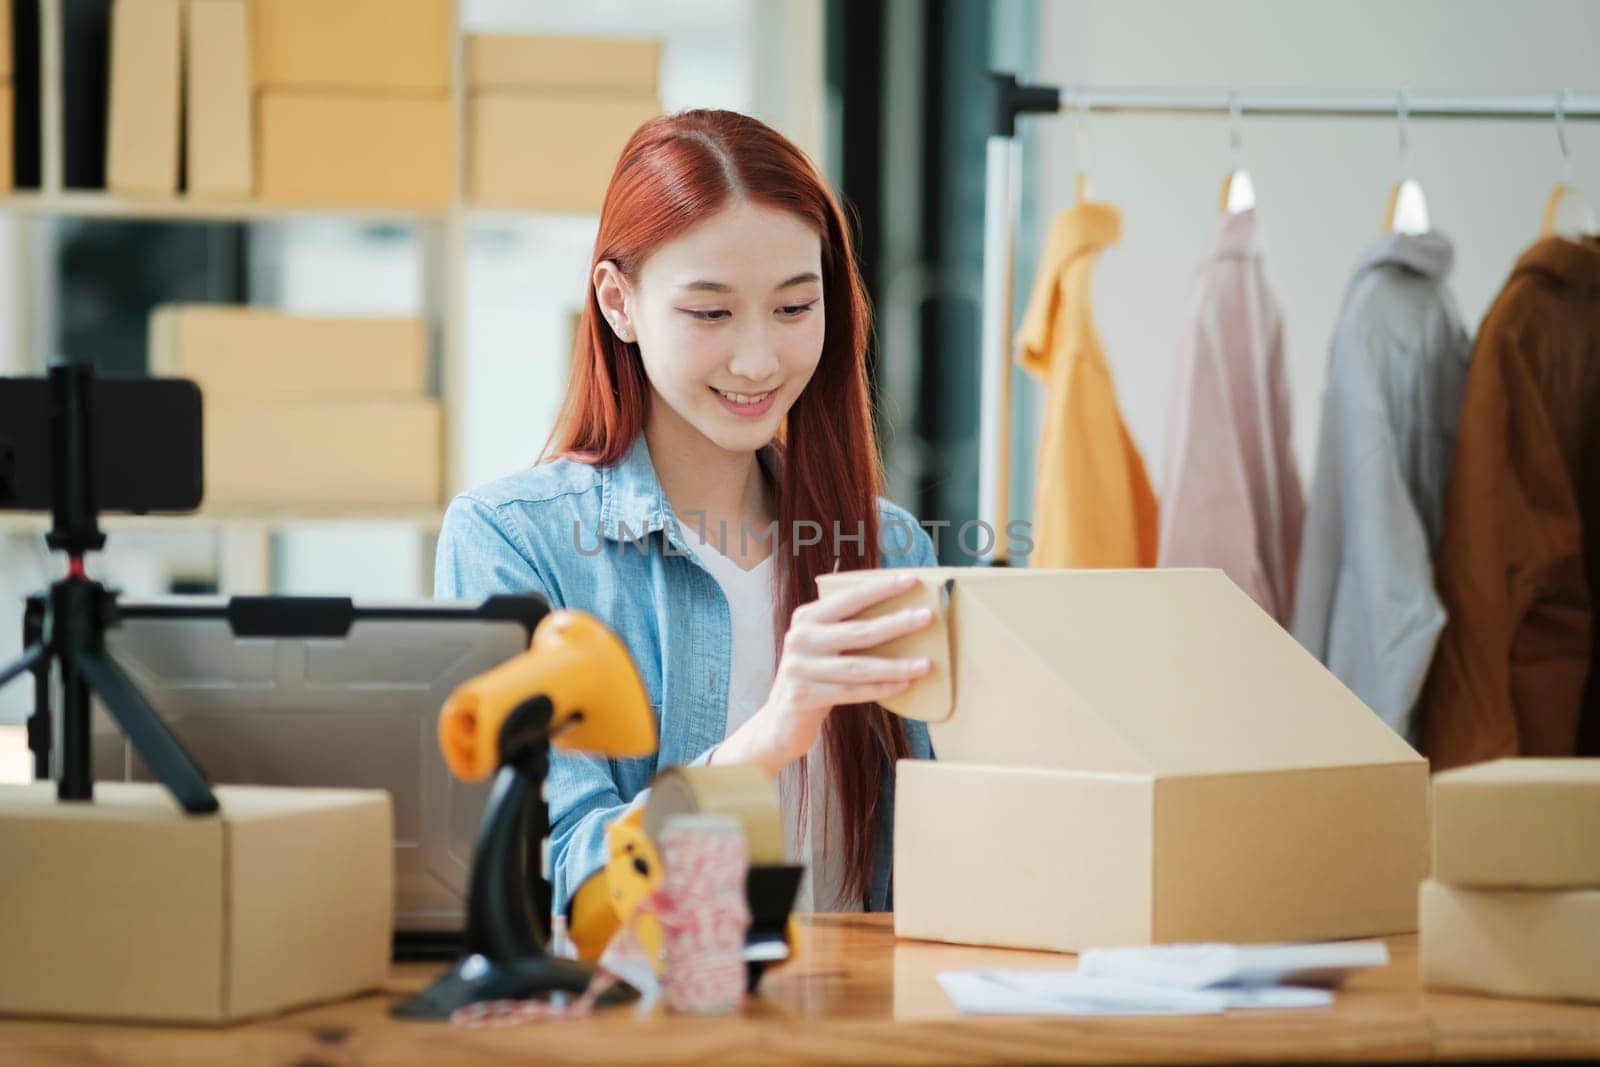 Smiling female entrepreneur packing clothing items for shipping in her startup workshop.